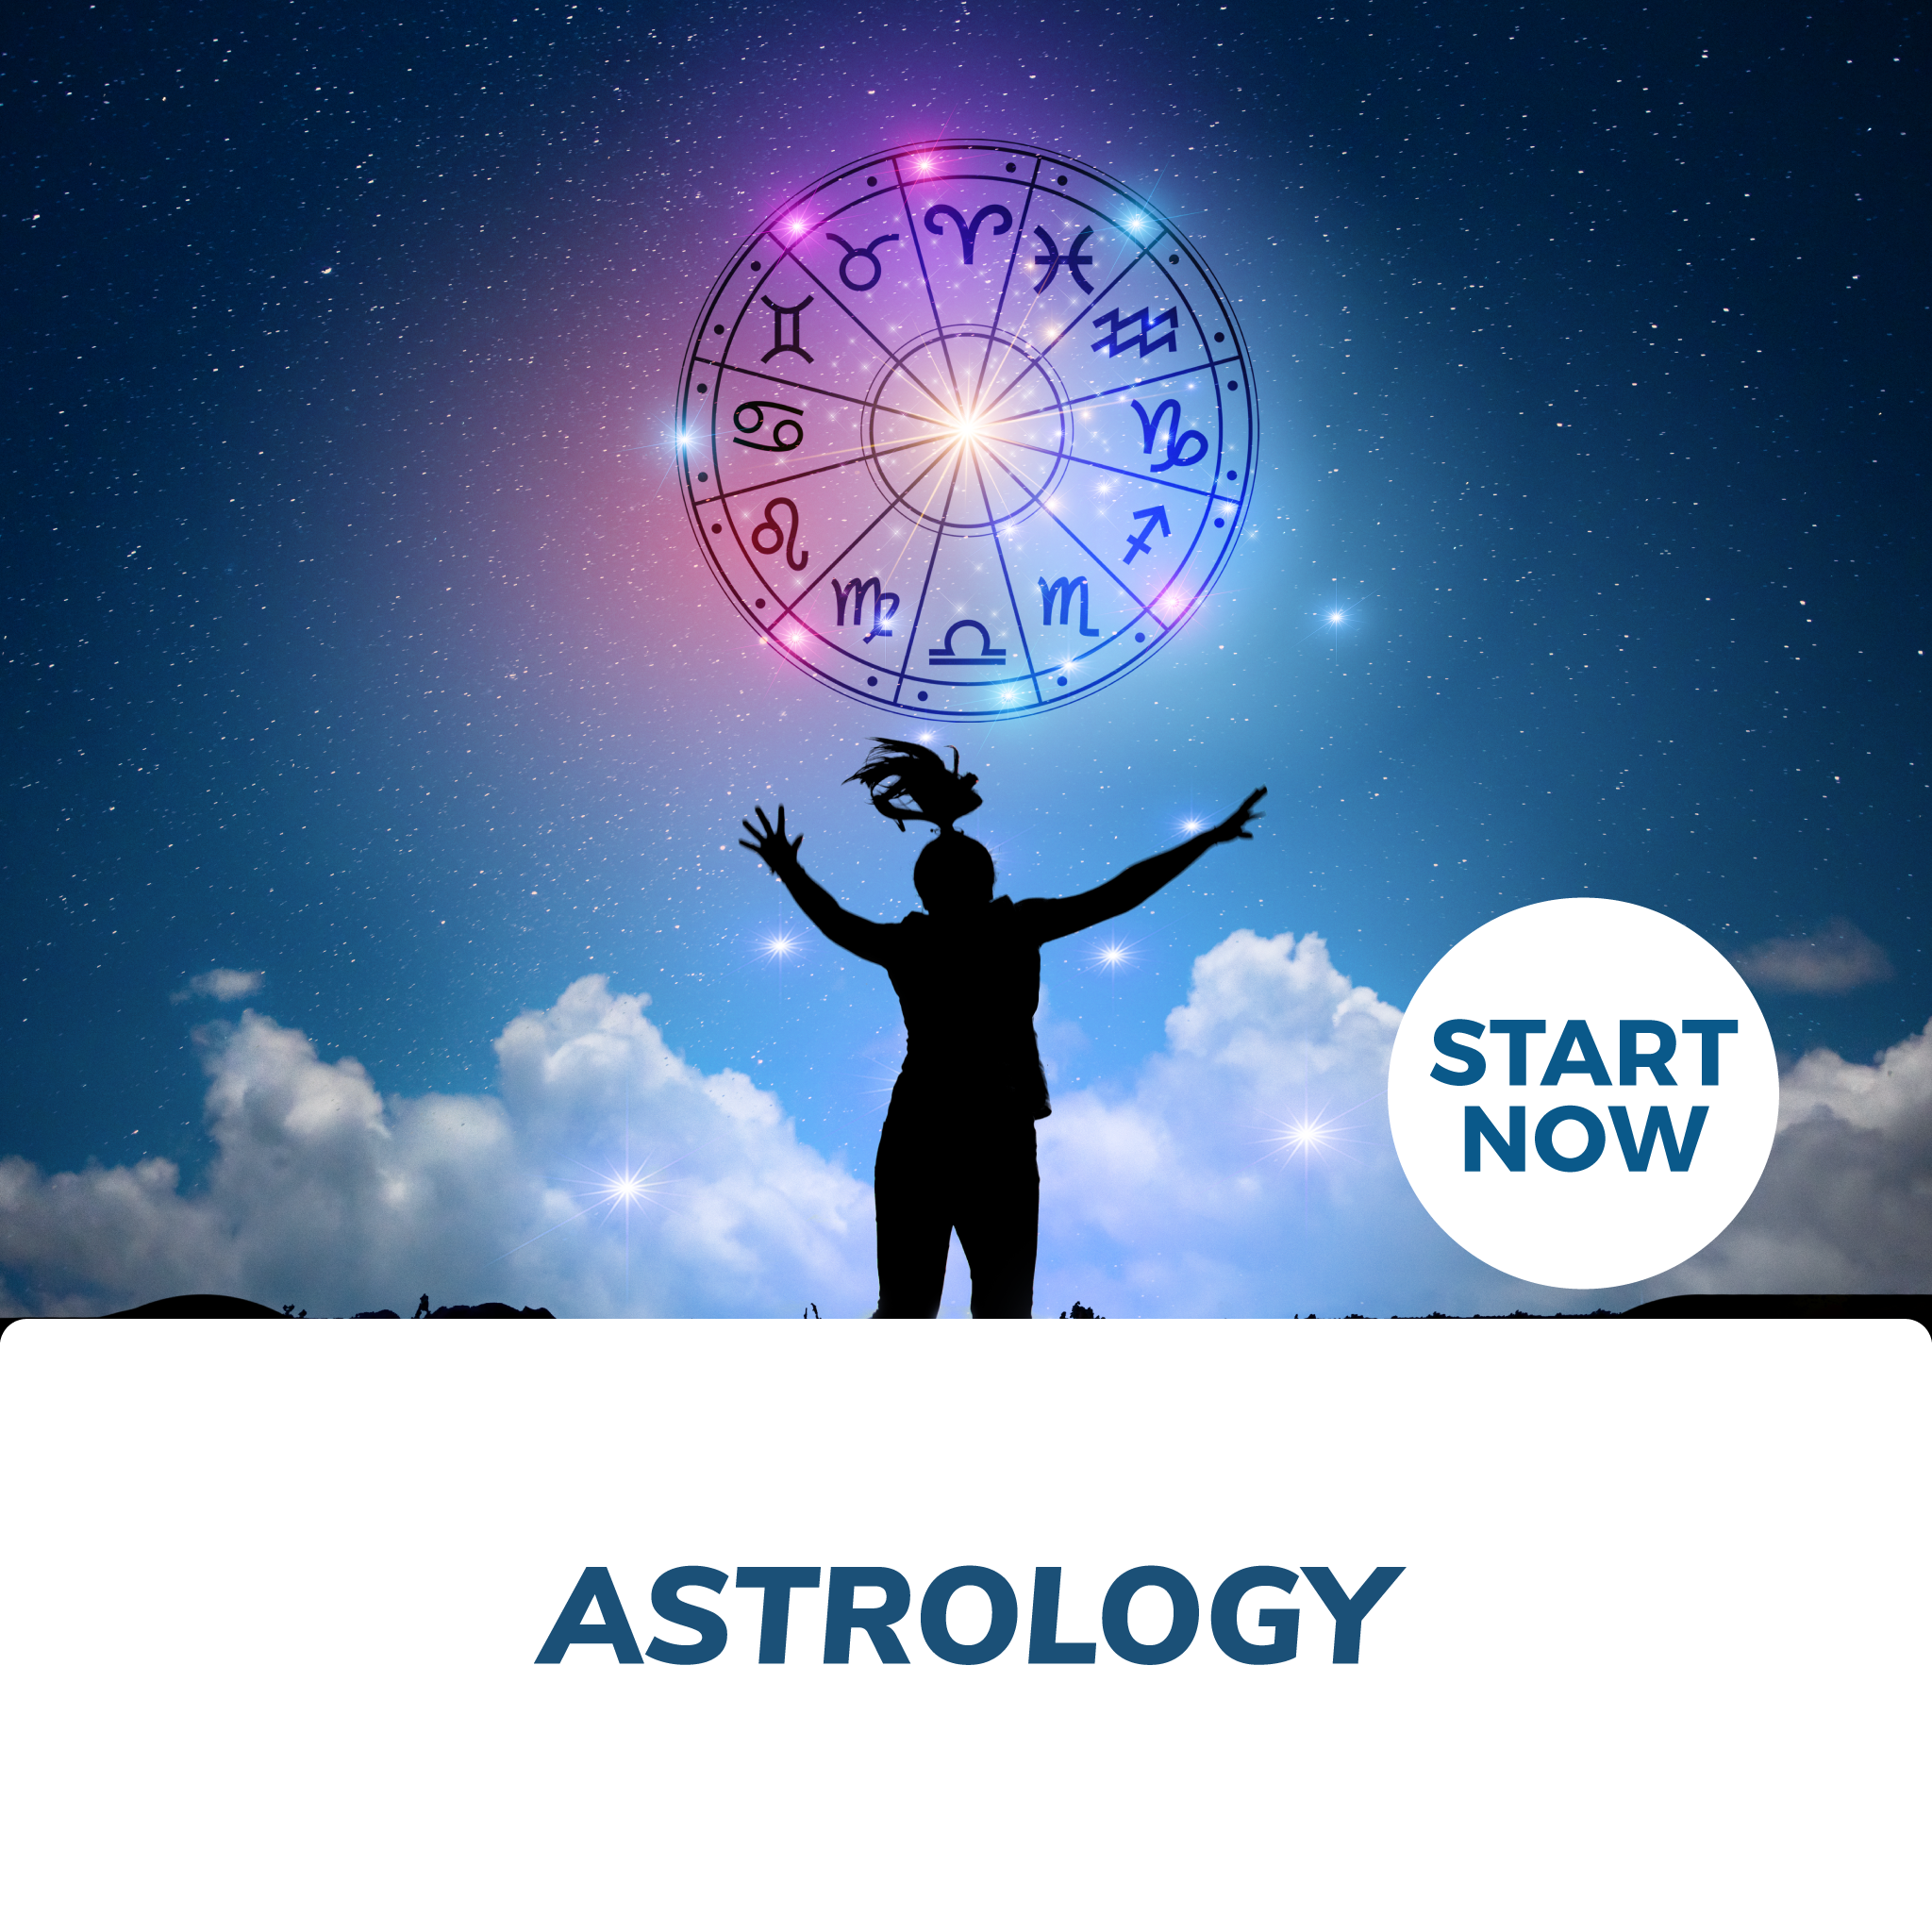 Certificate　For　Courses　Success　Online　—　Course　Astrology　Learn　with